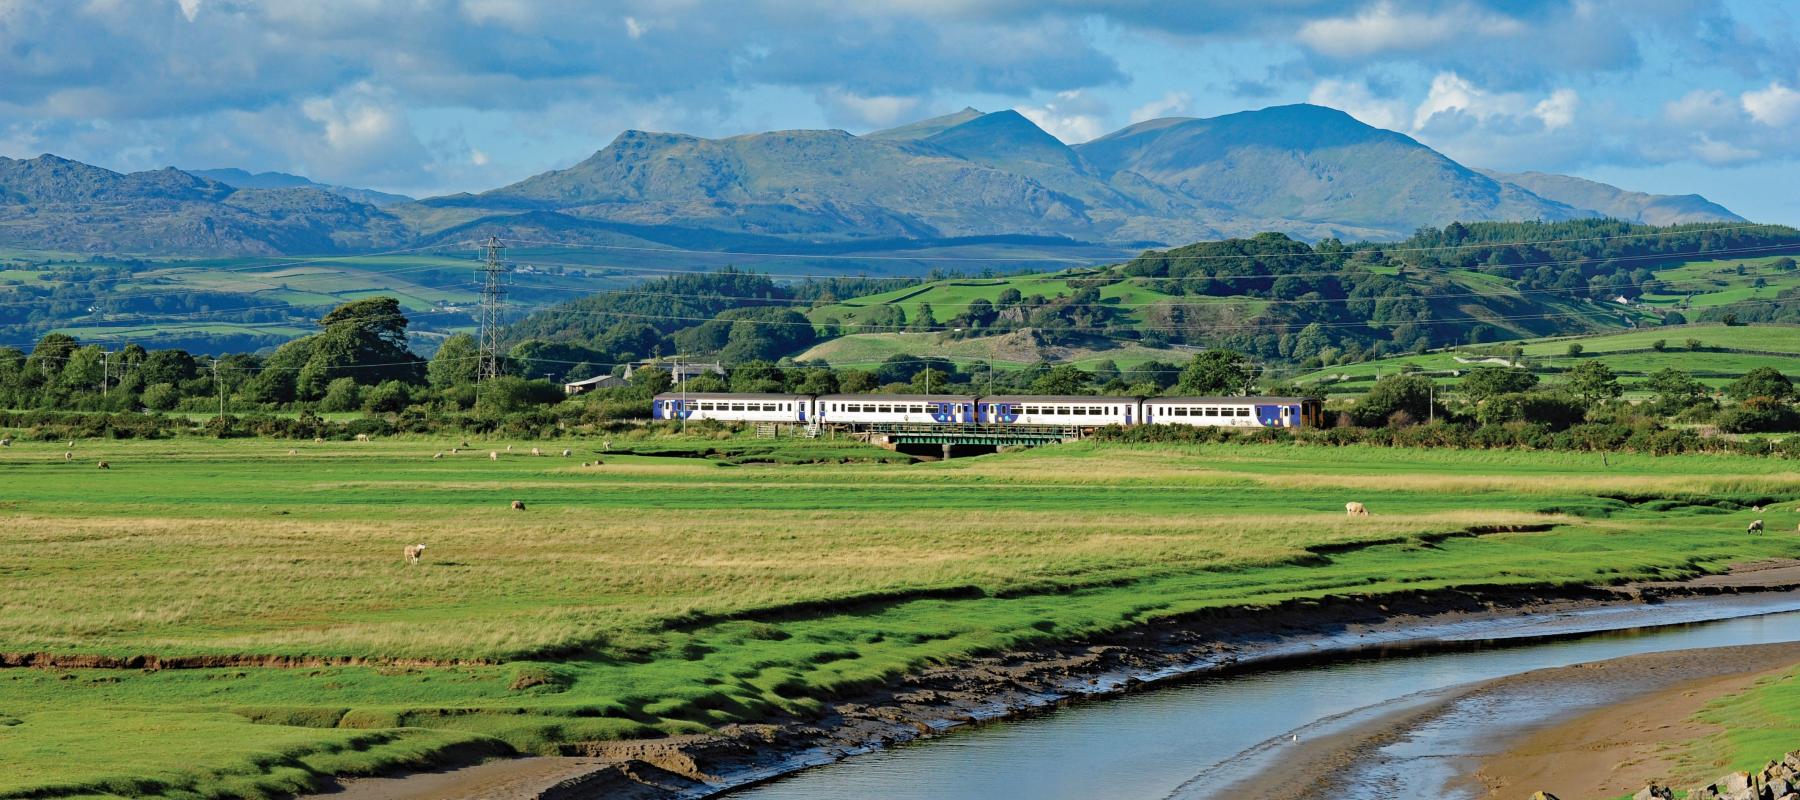 Train travelling through countryside with mountains in background